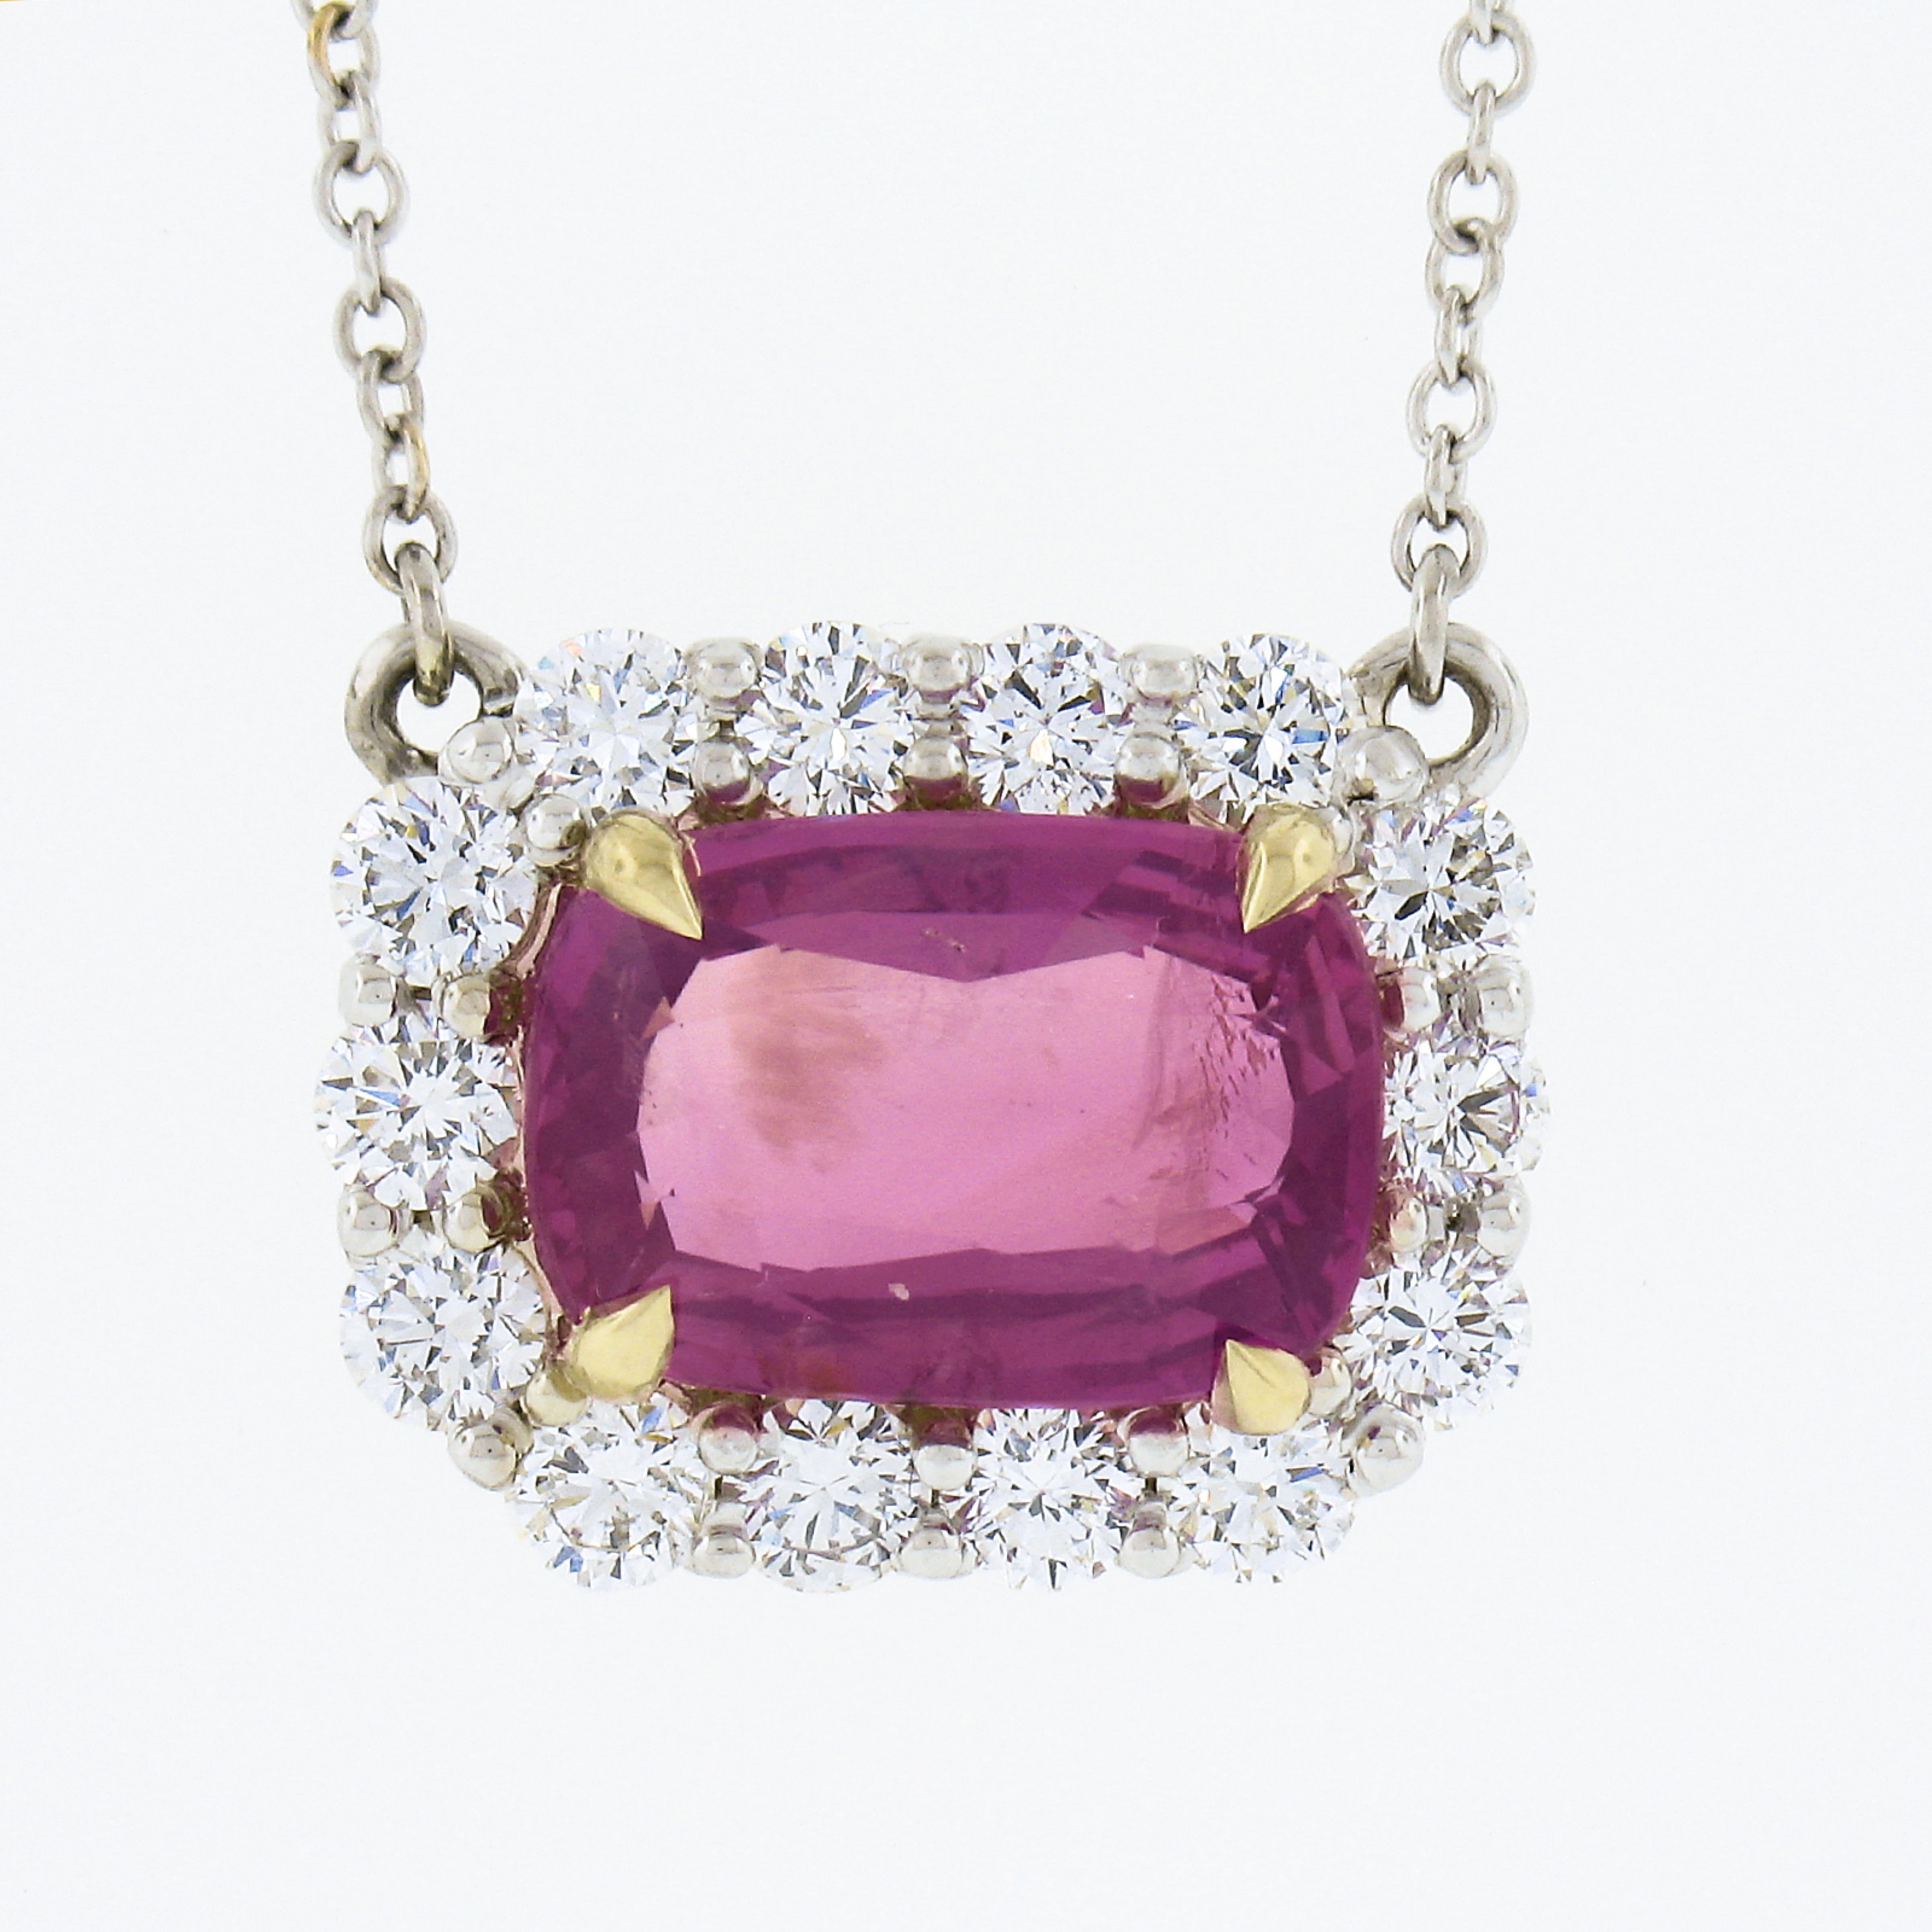 Here we have a gorgeous, brand new and custom made pendant necklace crafted in solid 18k white gold and features a very fine, GIA certified, cushion brilliant cut pink sapphire solitaire neatly set in yellow gold at the center, in which is further